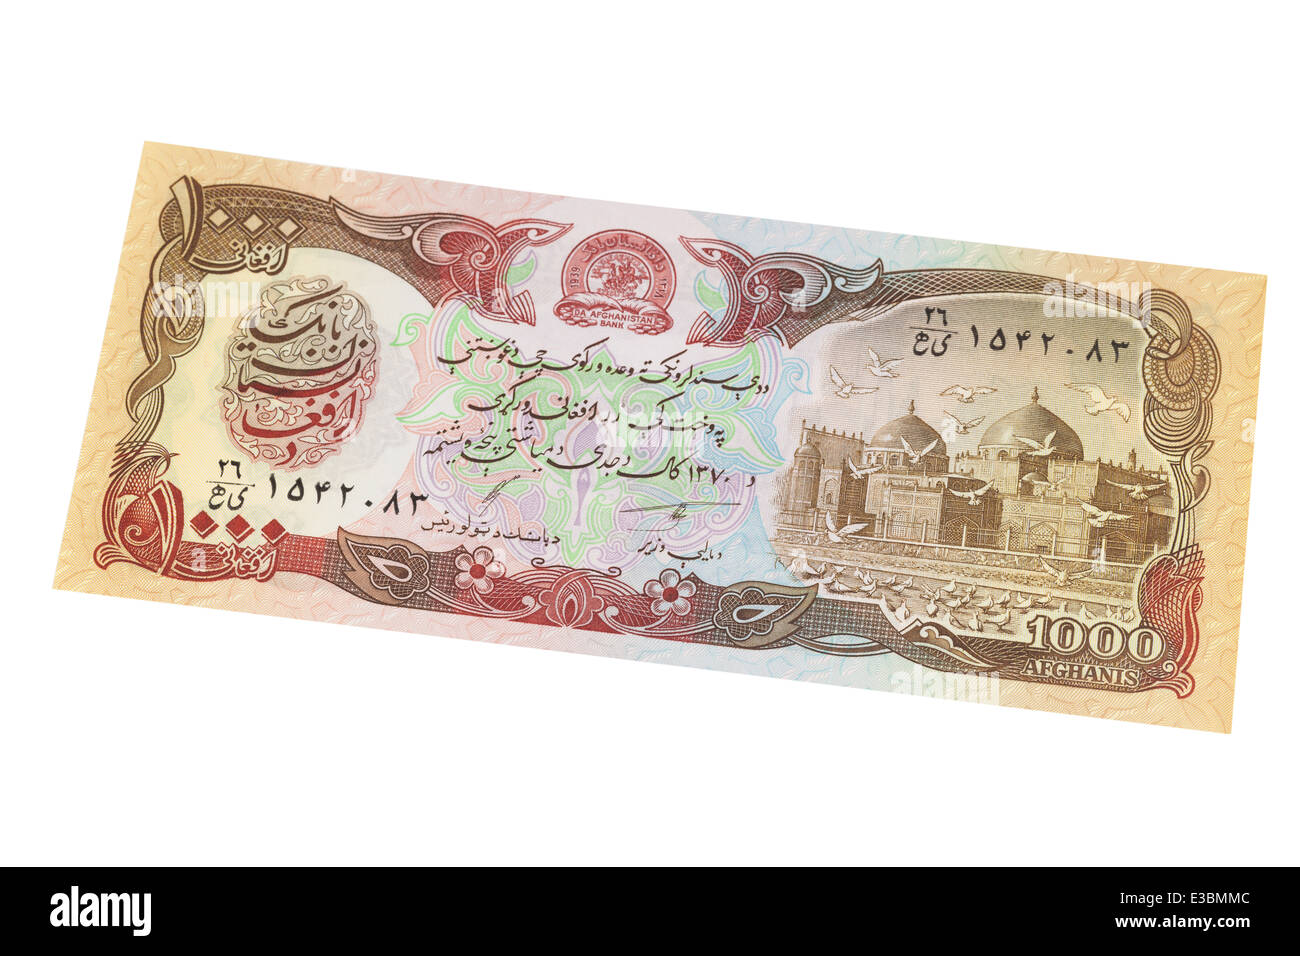 Afghan one thousand afghani banknote on a white background Stock Photo